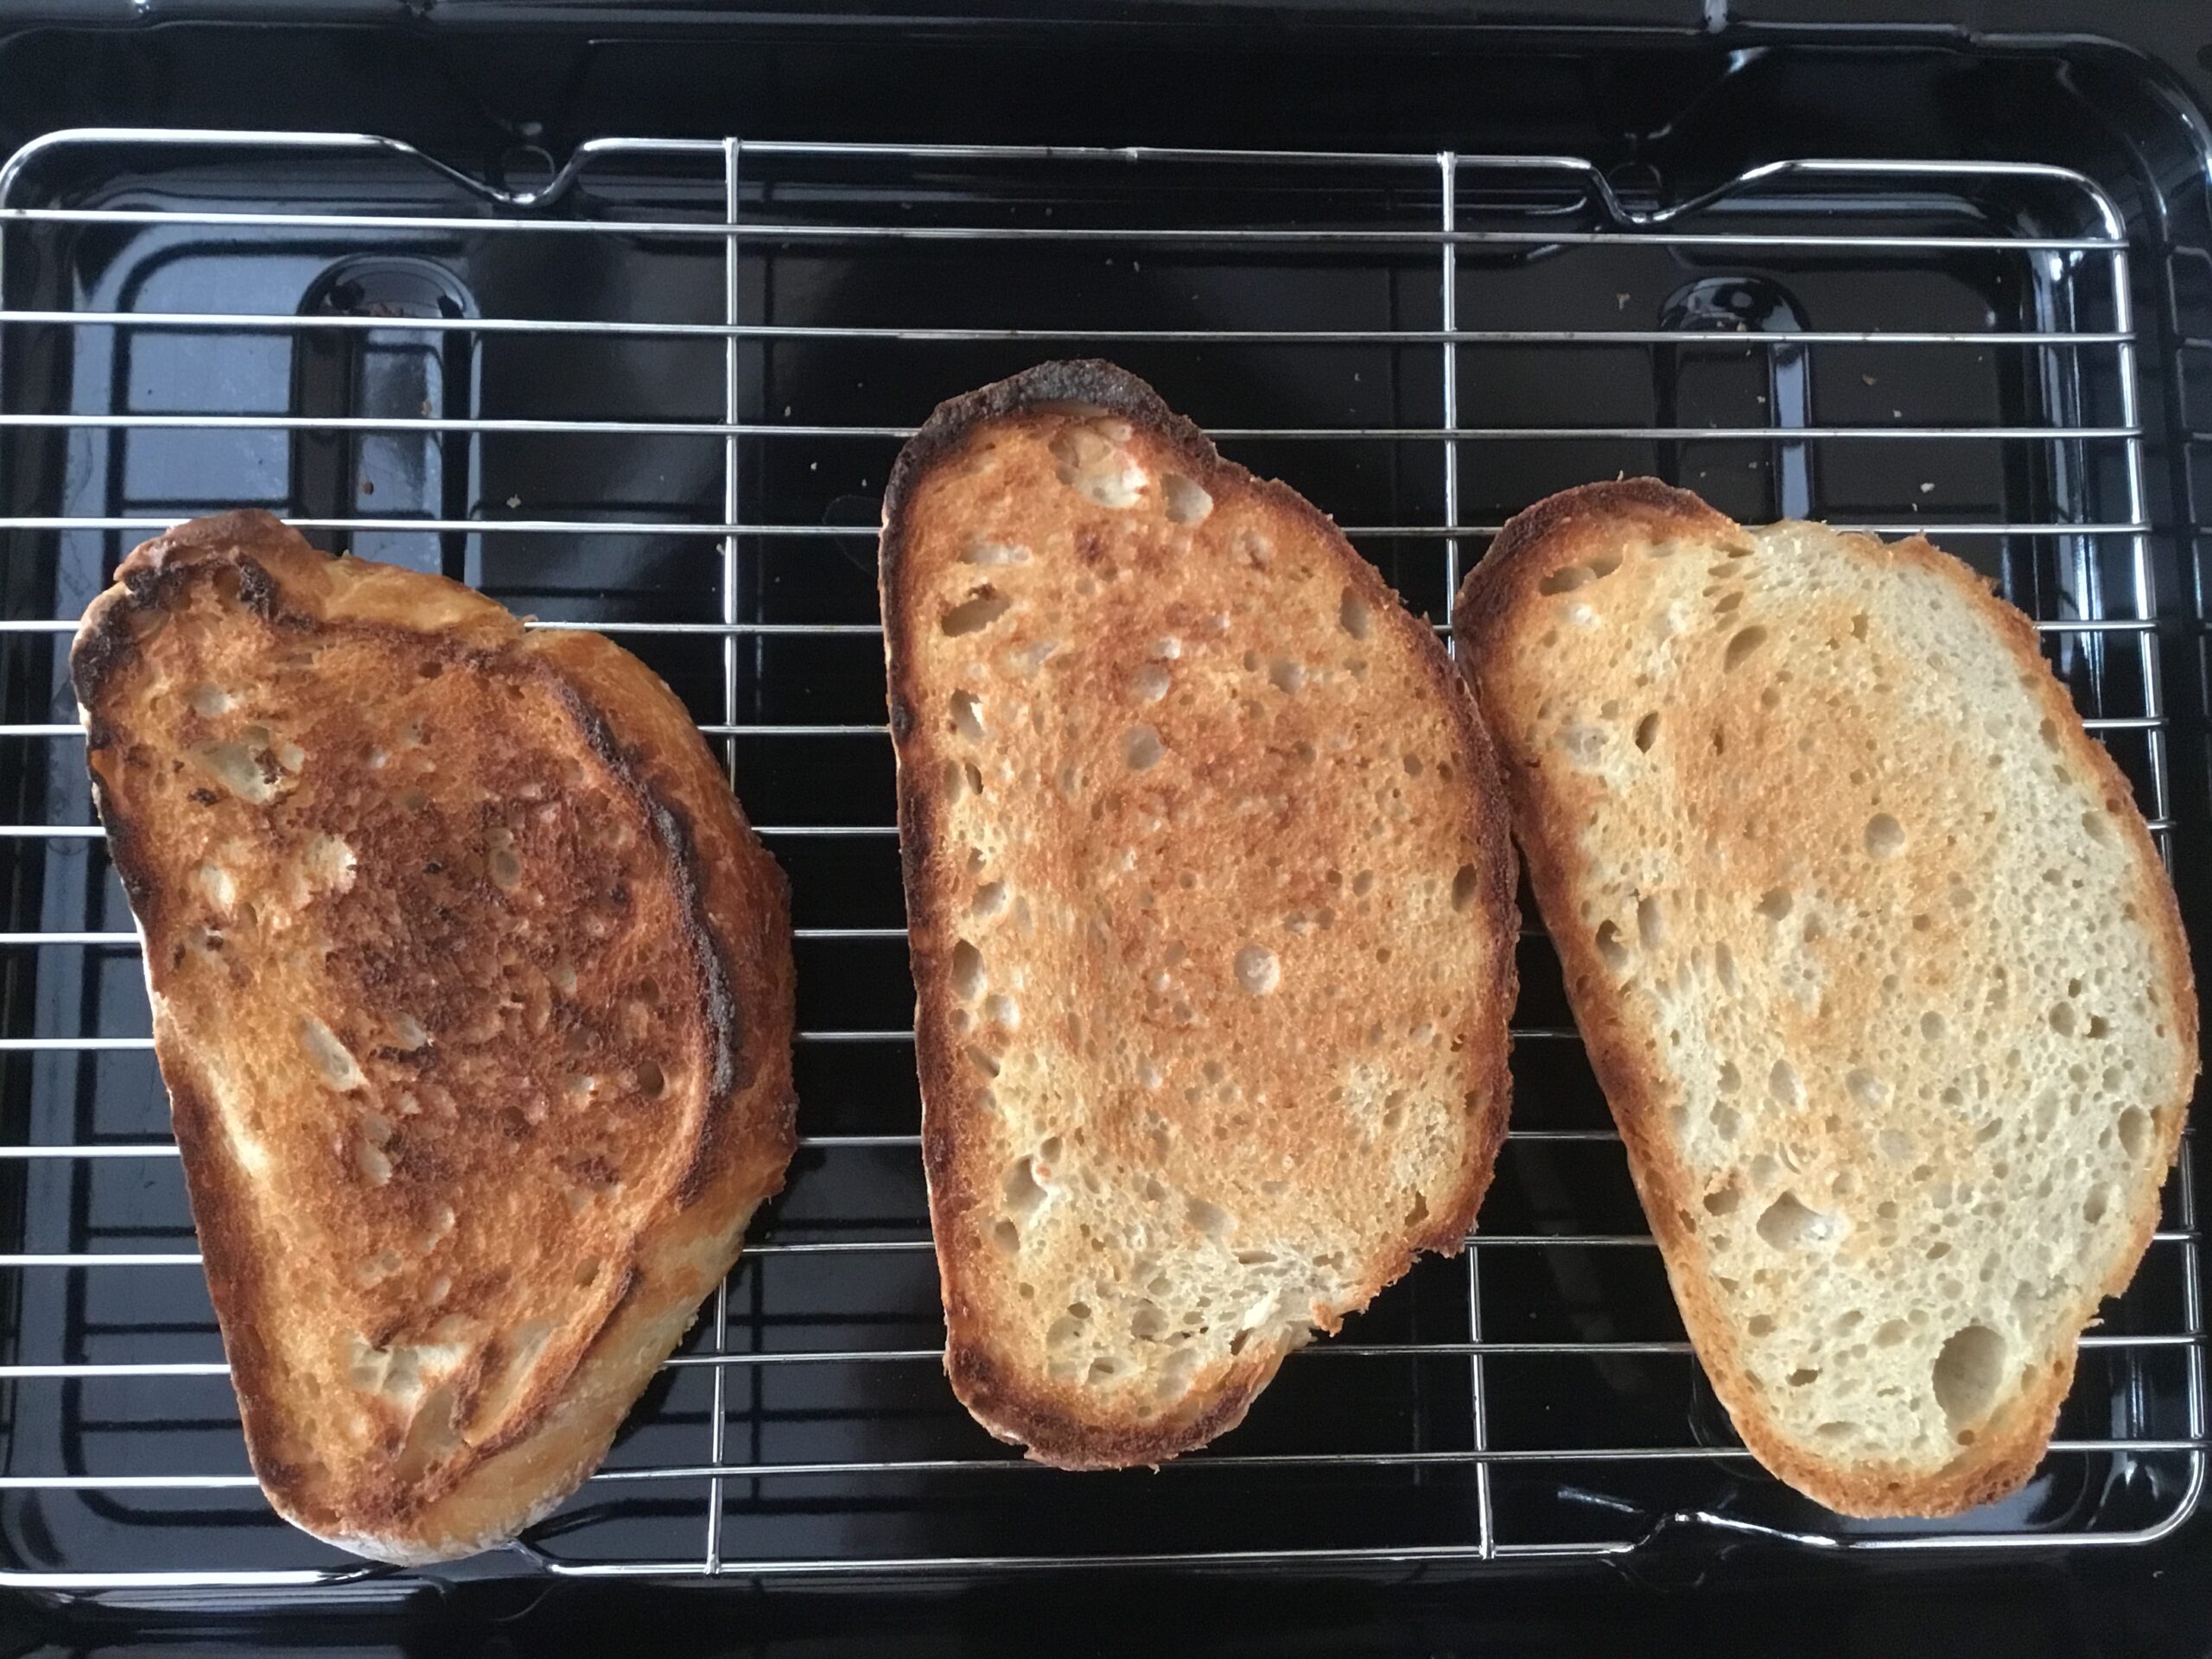 Toasted pain de campagne